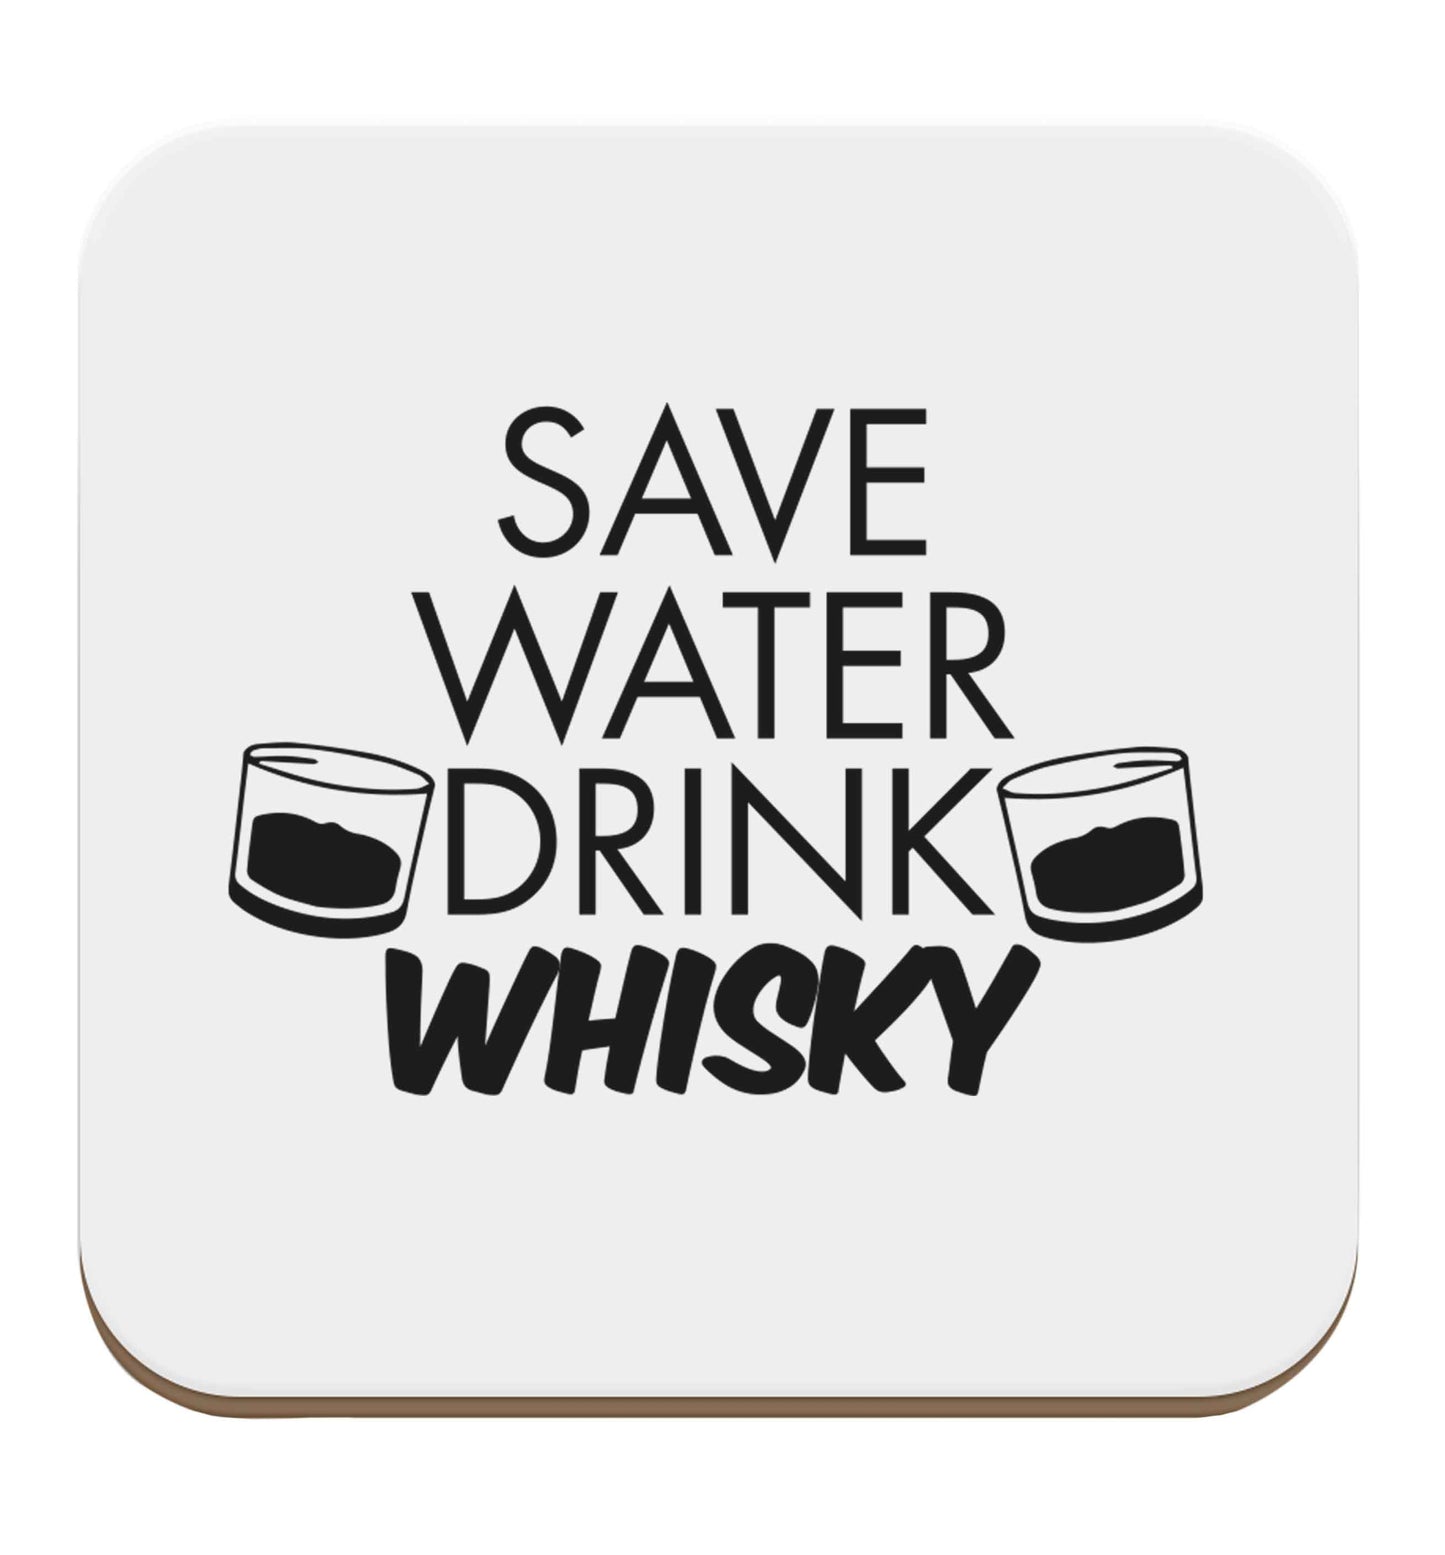 Save water drink whisky set of four coasters